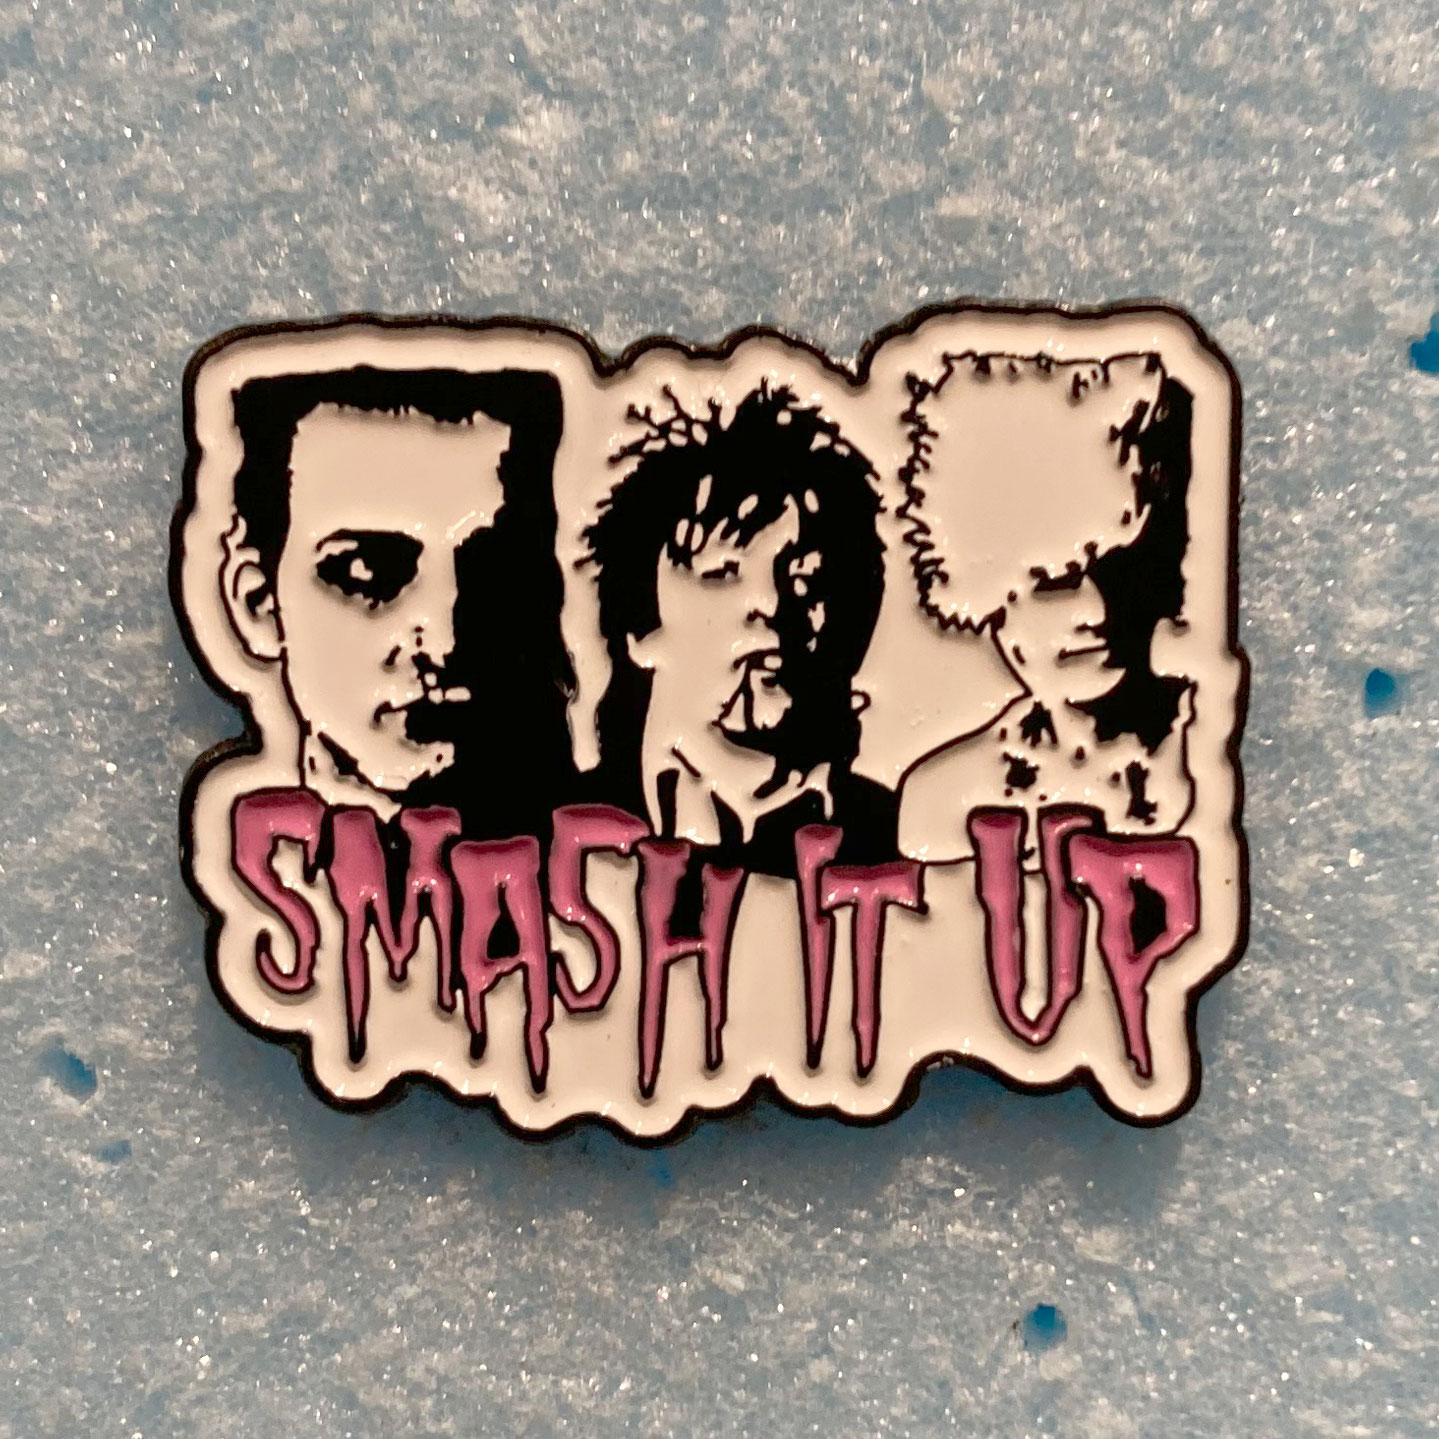 THE DAMNED ピンバッジ SMASH IT UP